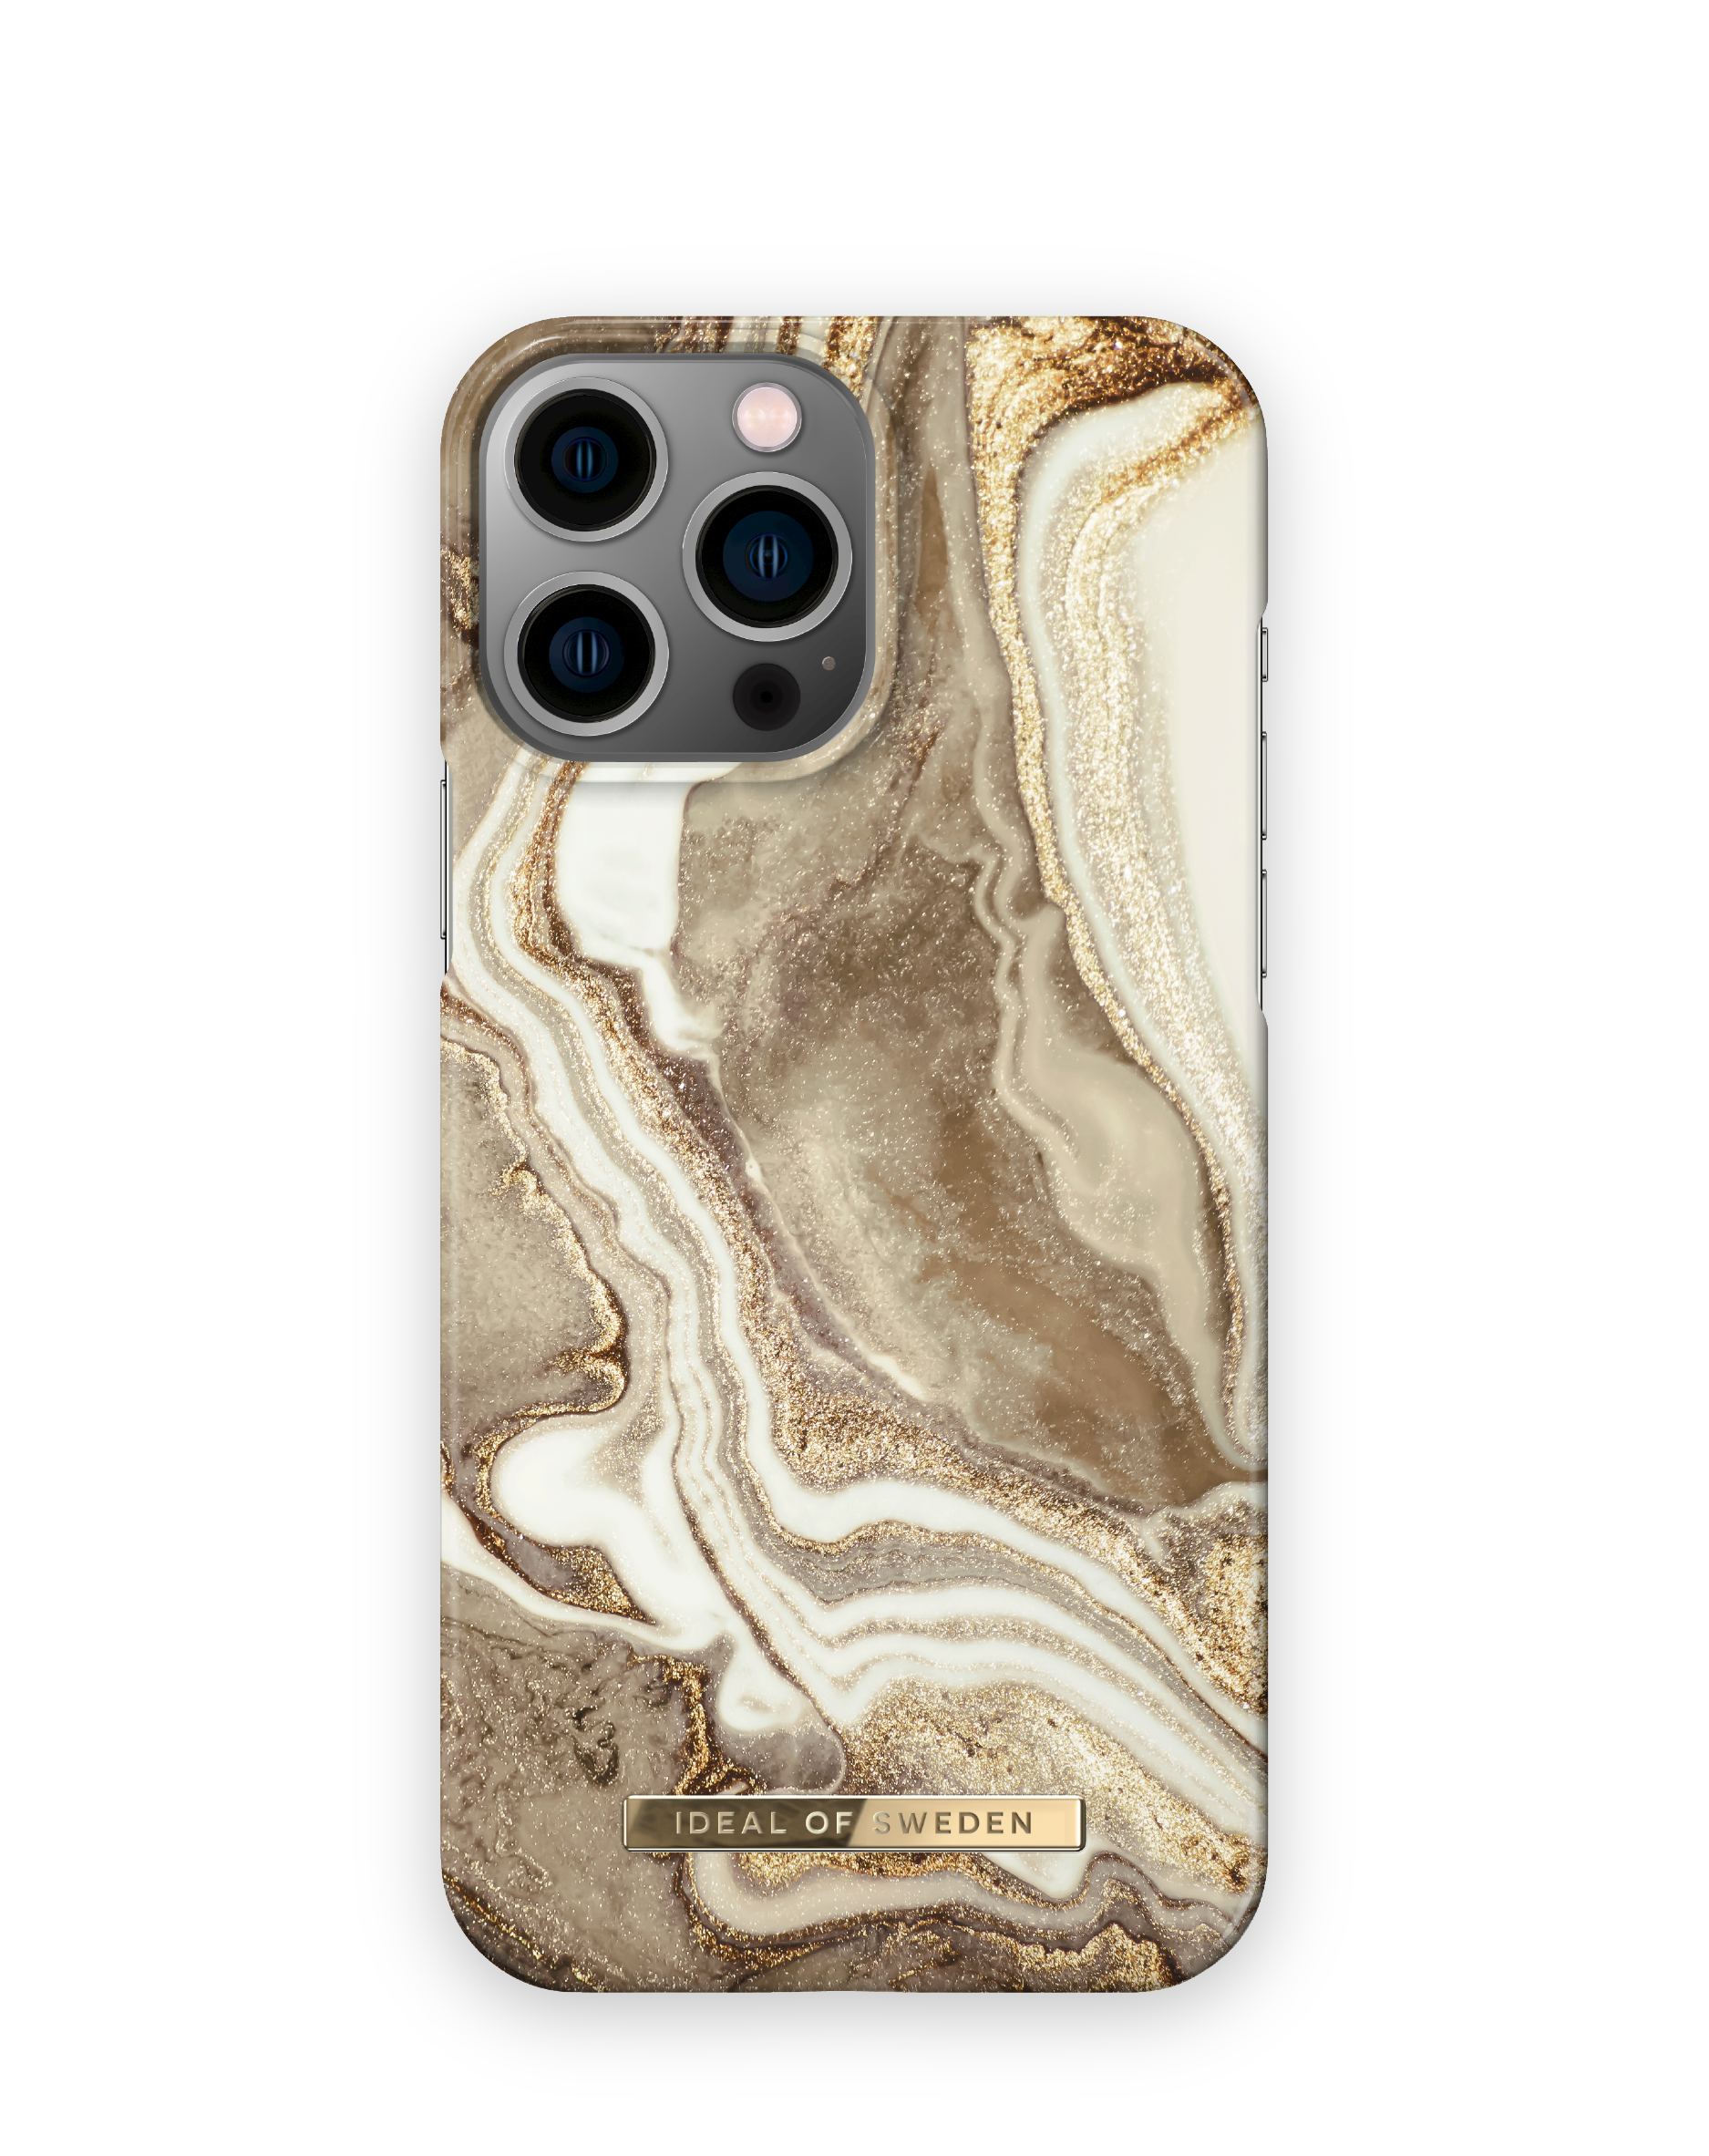 OF iPhone Apple, Sand Backcover, Golden IDFCGM19-I2167-164, IDEAL Marble Pro Max, SWEDEN 13